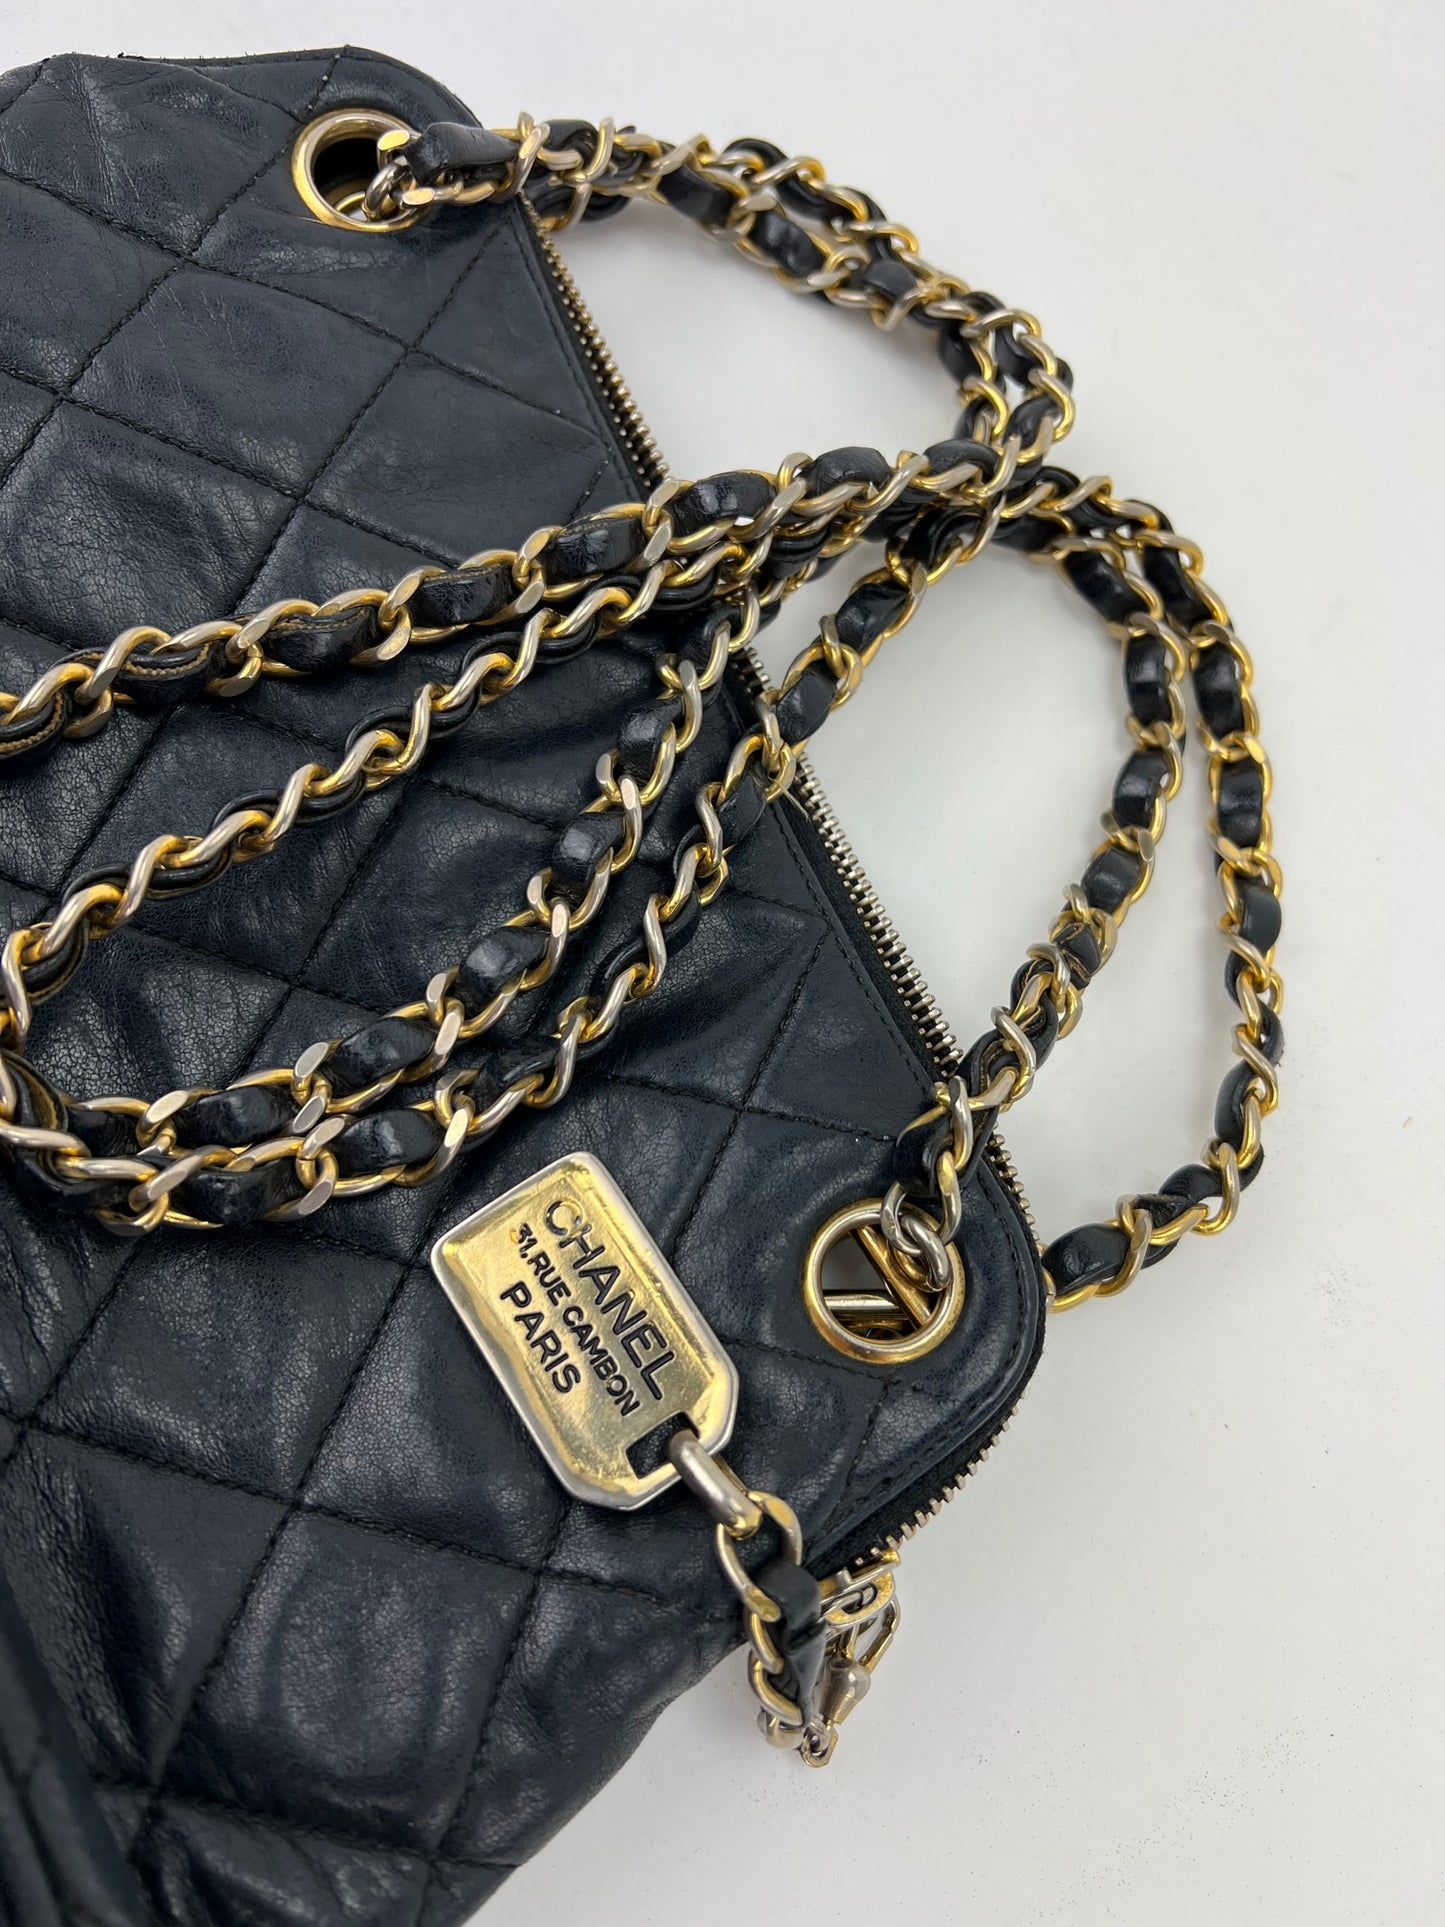 CHANEL Cambon Vintage Charms Bracelet - certified pre-owned luxury